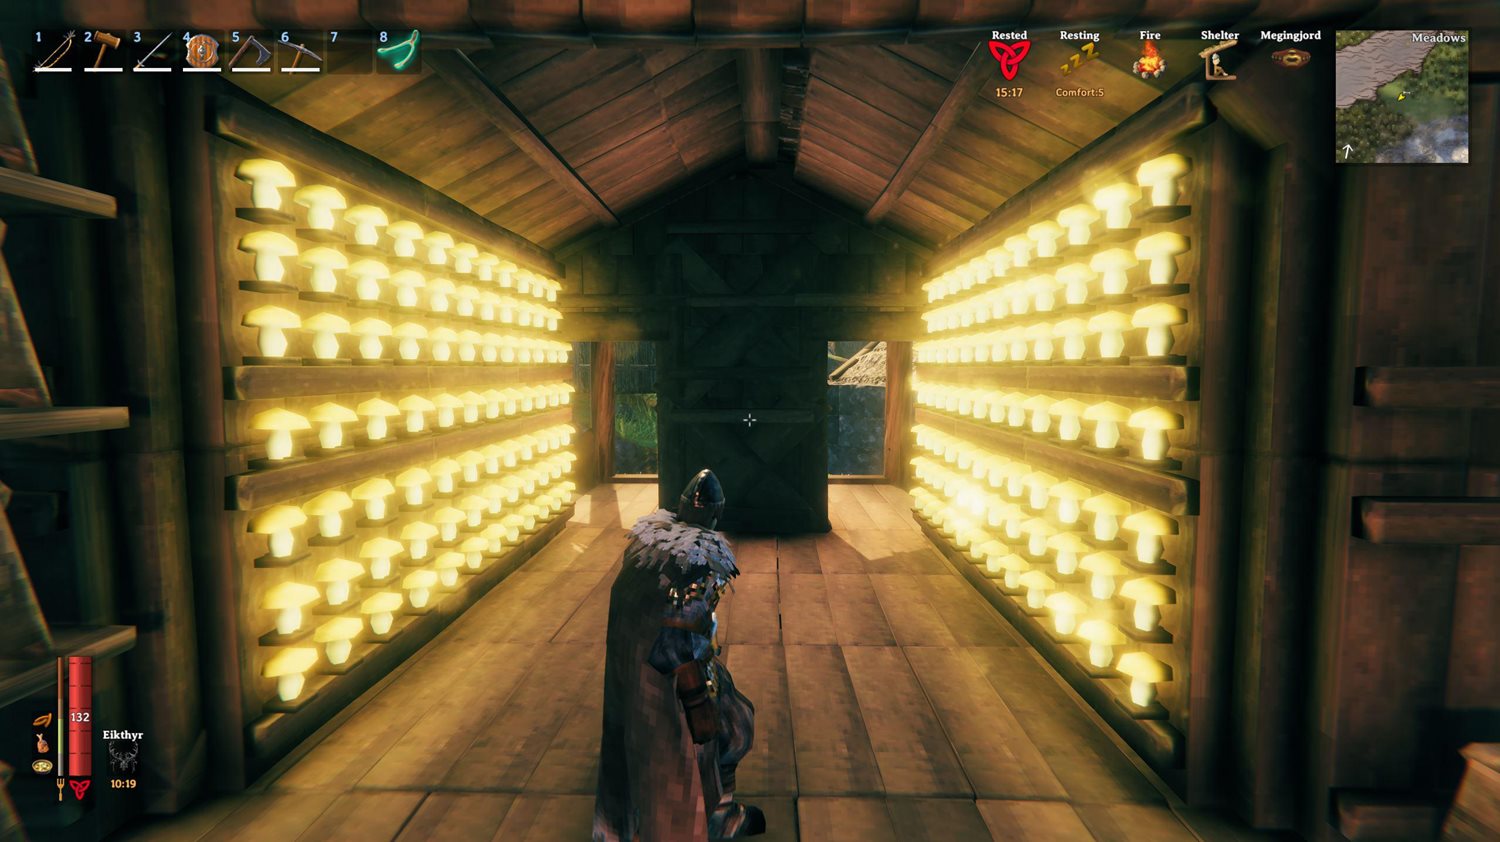 How important is light in a video game? The Valheim case